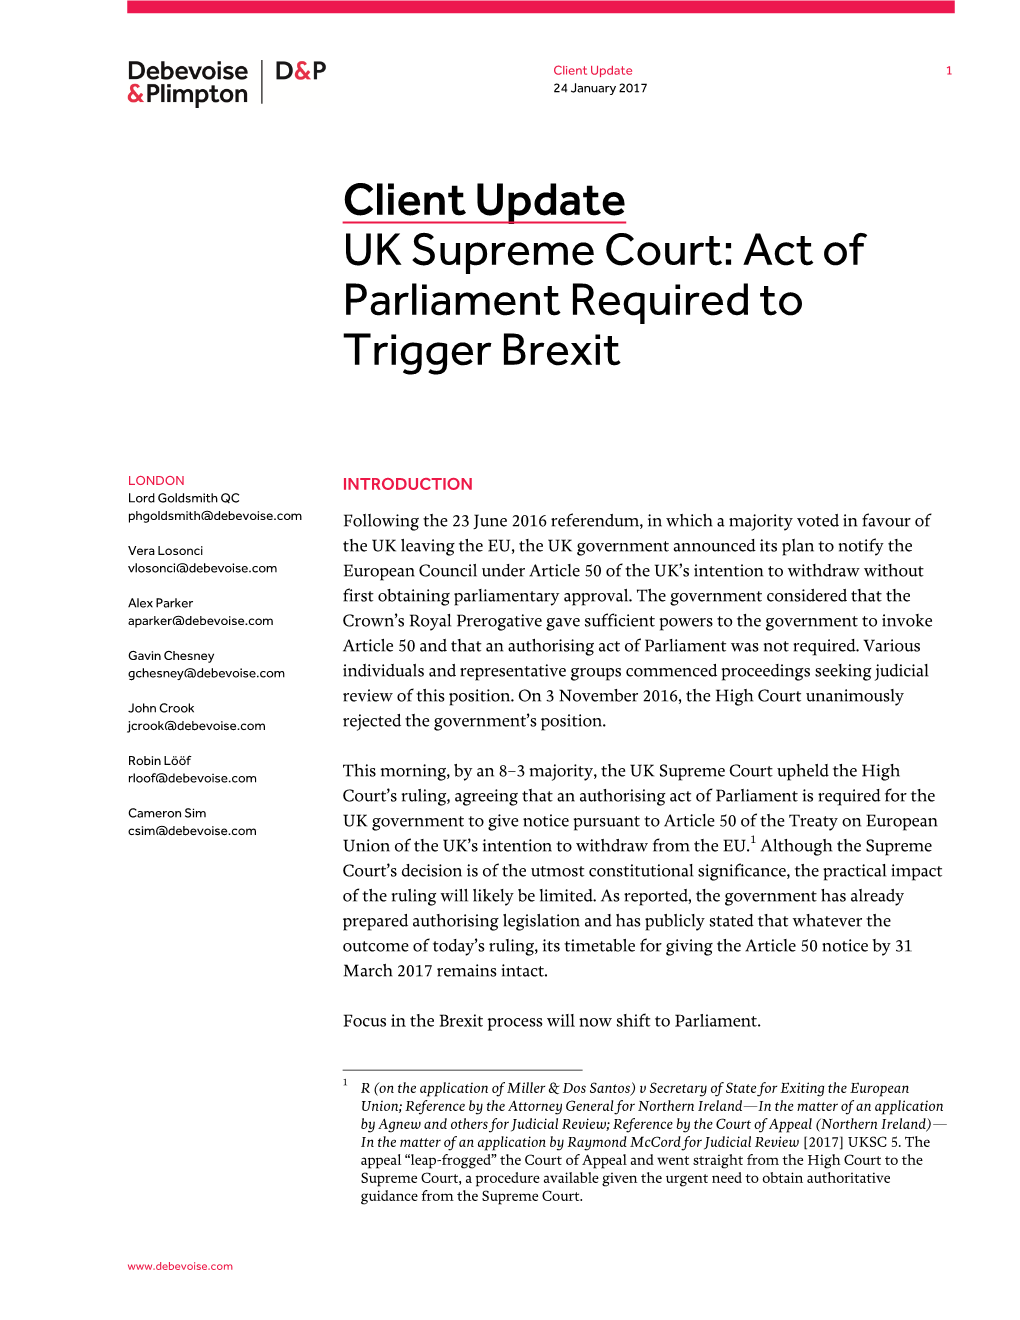 Client Update UK Supreme Court: Act of Parliament Required to Trigger Brexit